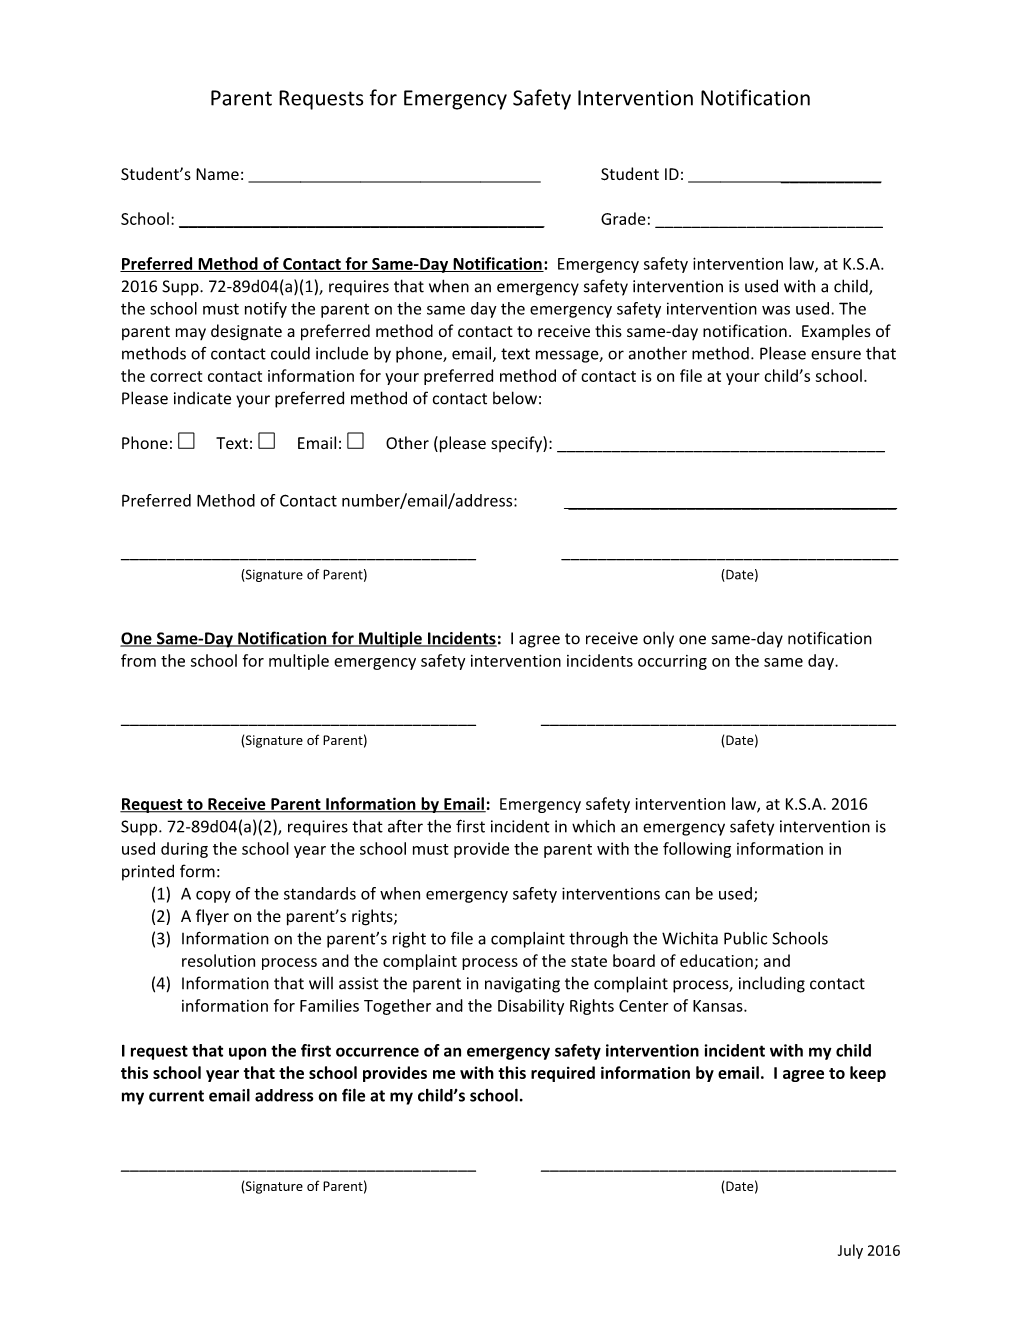 Parent Requests for Emergency Safety Intervention Notification